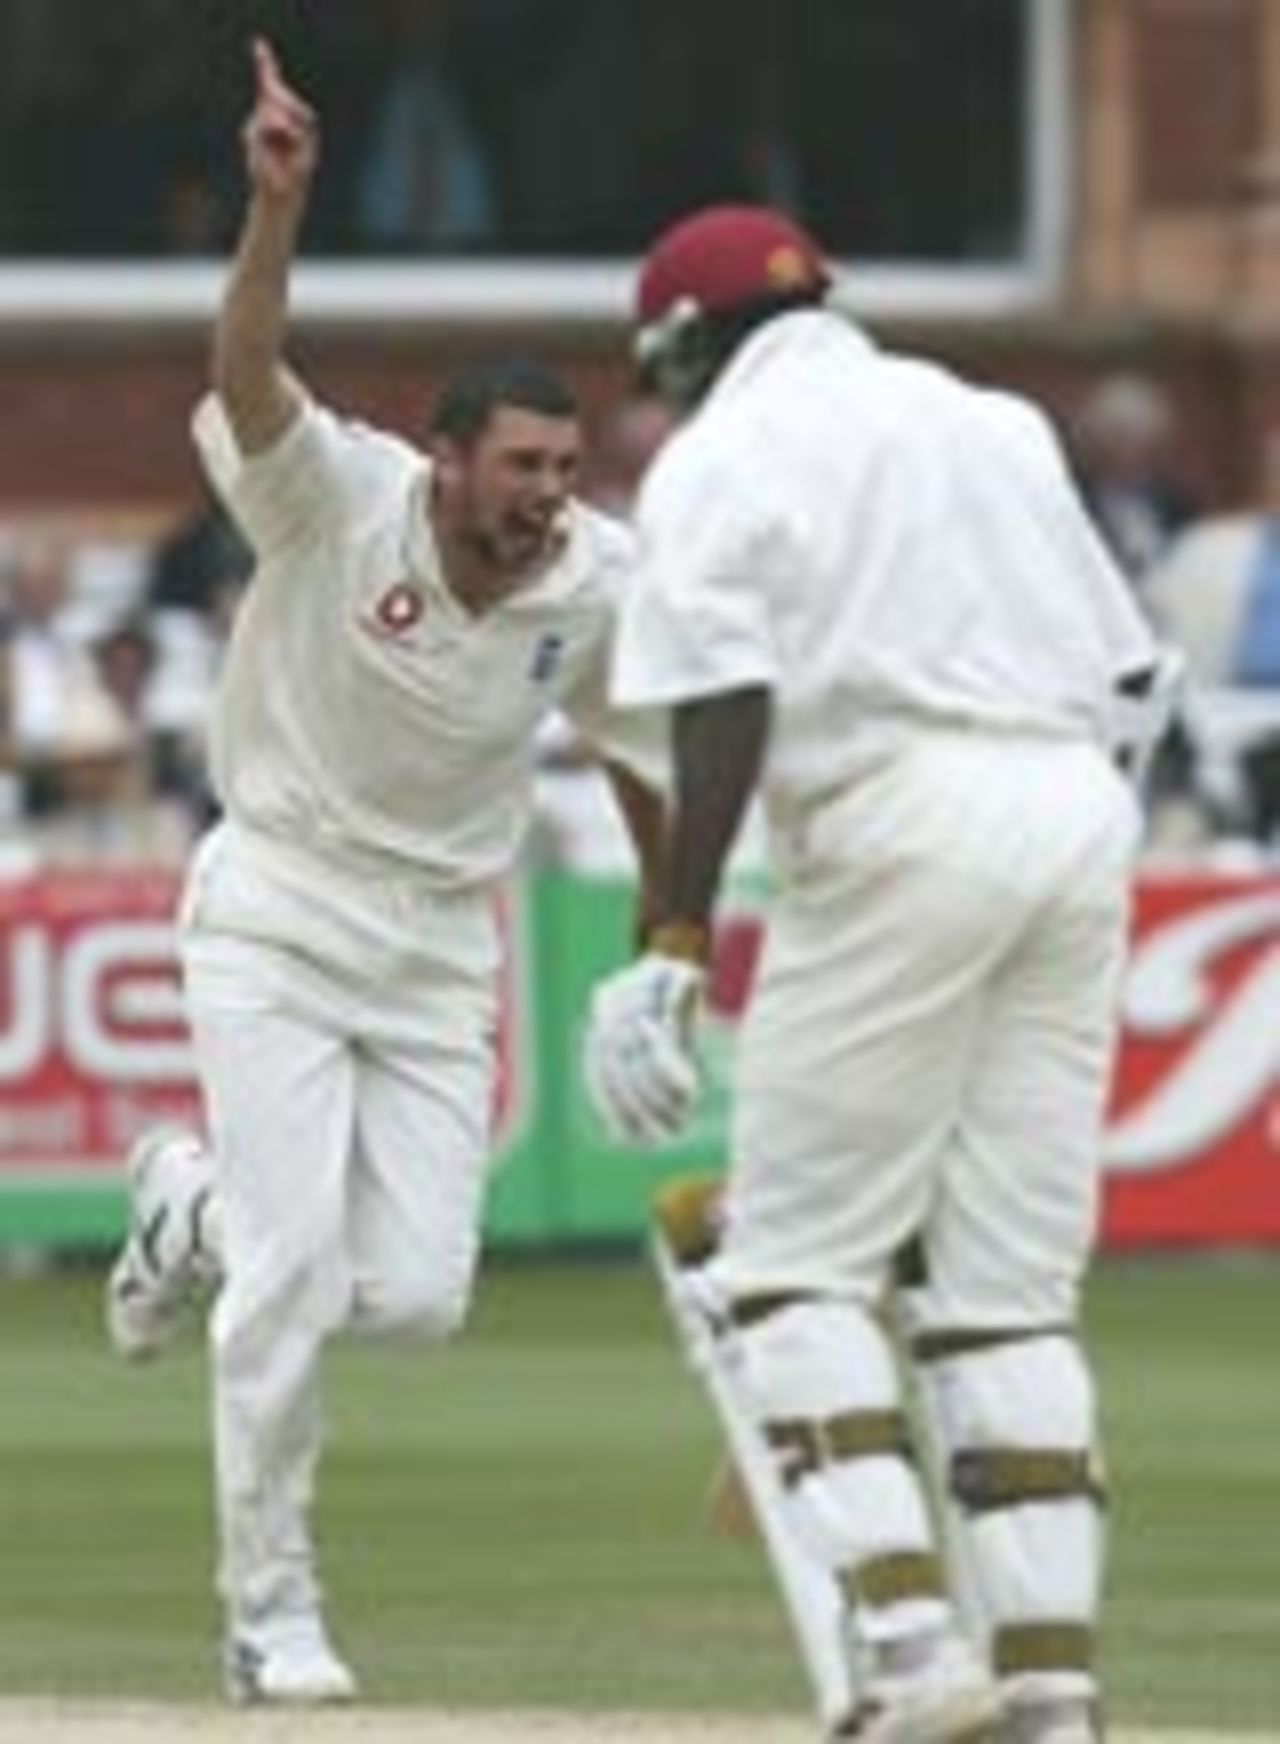 Steve Harmison celebrates the wicket of Chris Gayle as England take control at Lord's, England v West Indies, 1st Test, July 25 2004